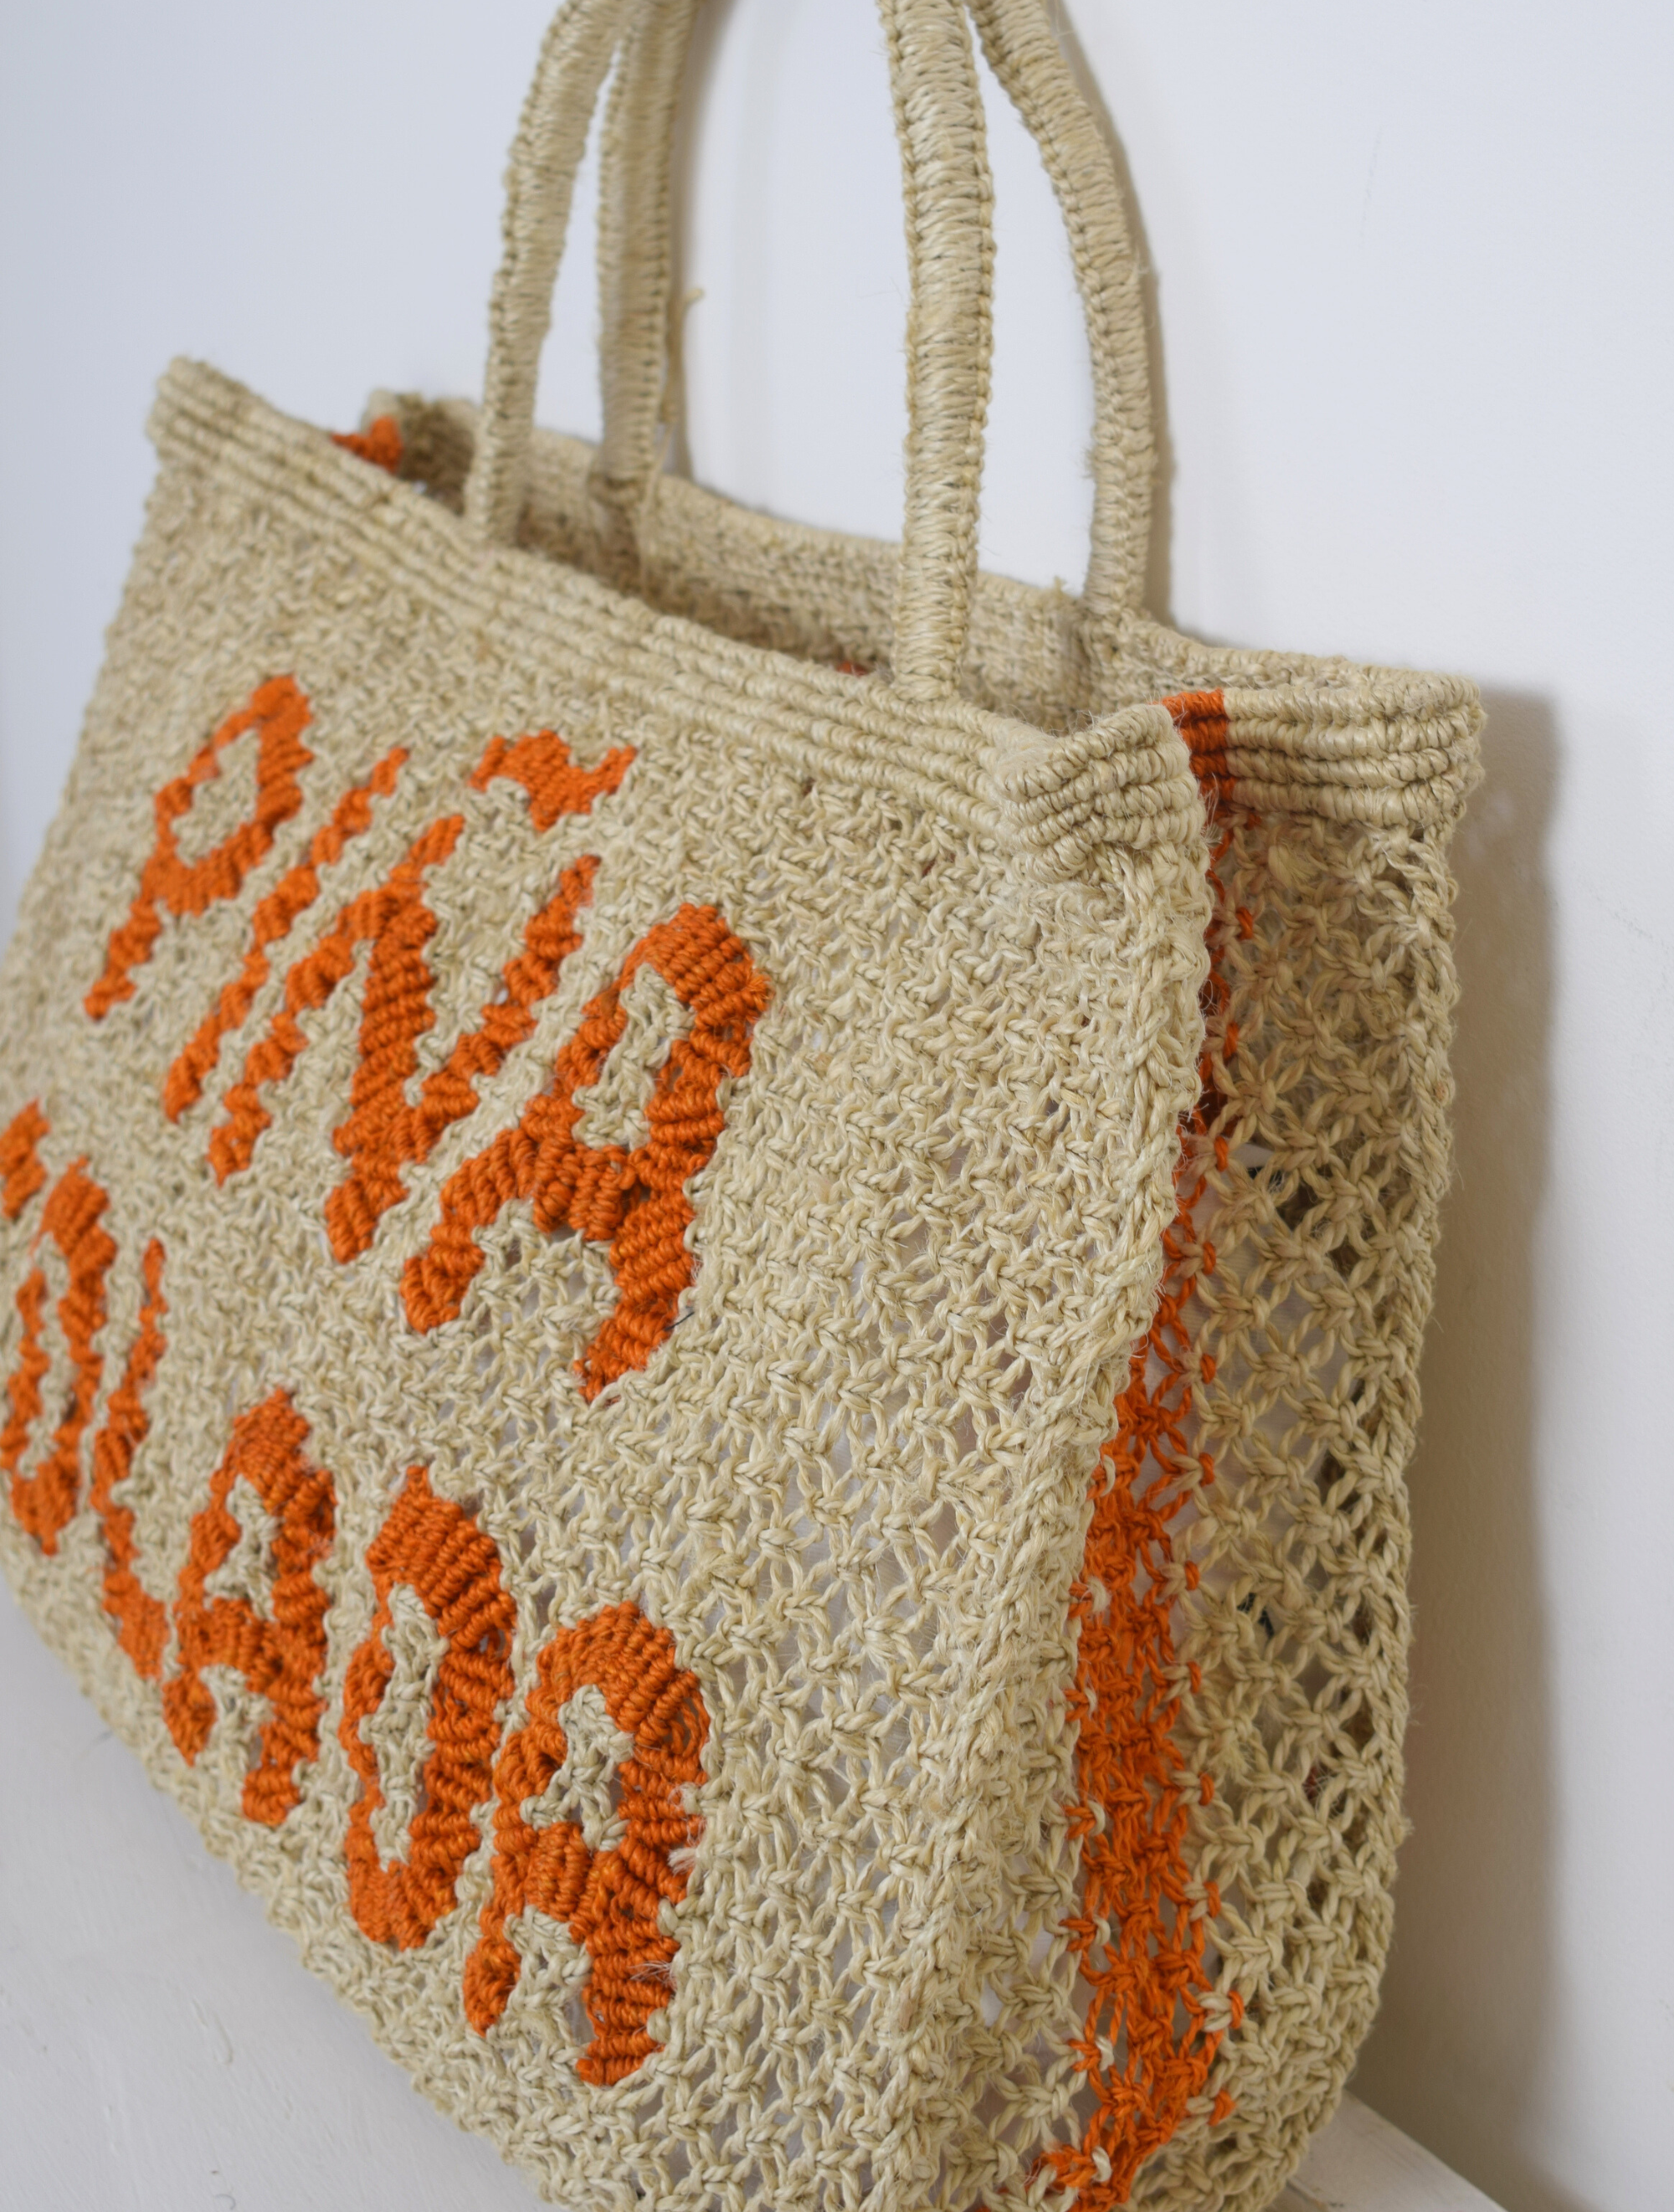 Woven nautral bag with pina colada writen on it in orange